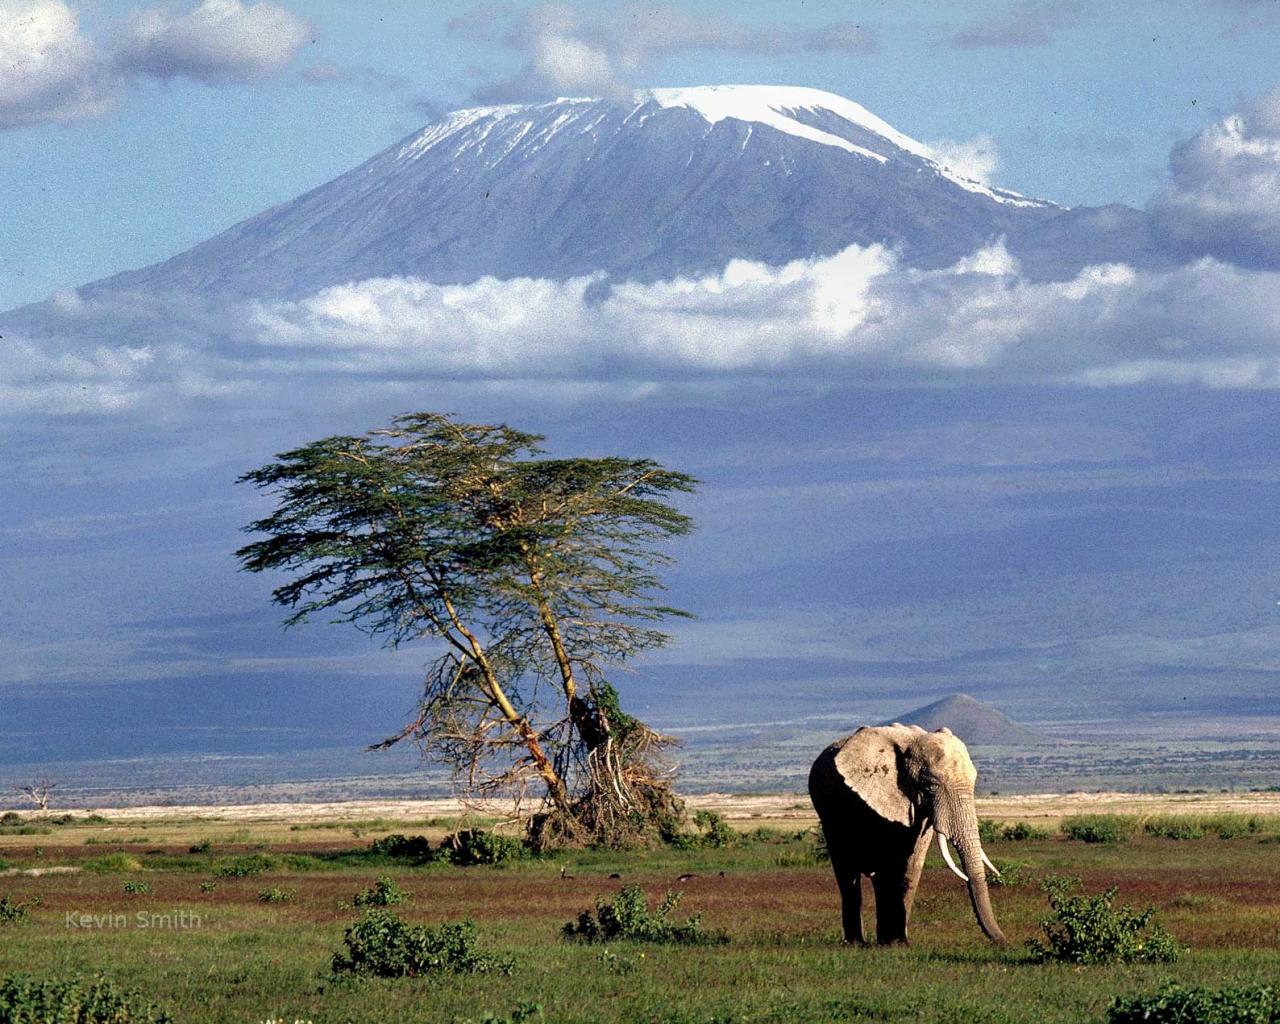 Set a vertical limit by conquering Mount Kilimanjaro in Tanzania